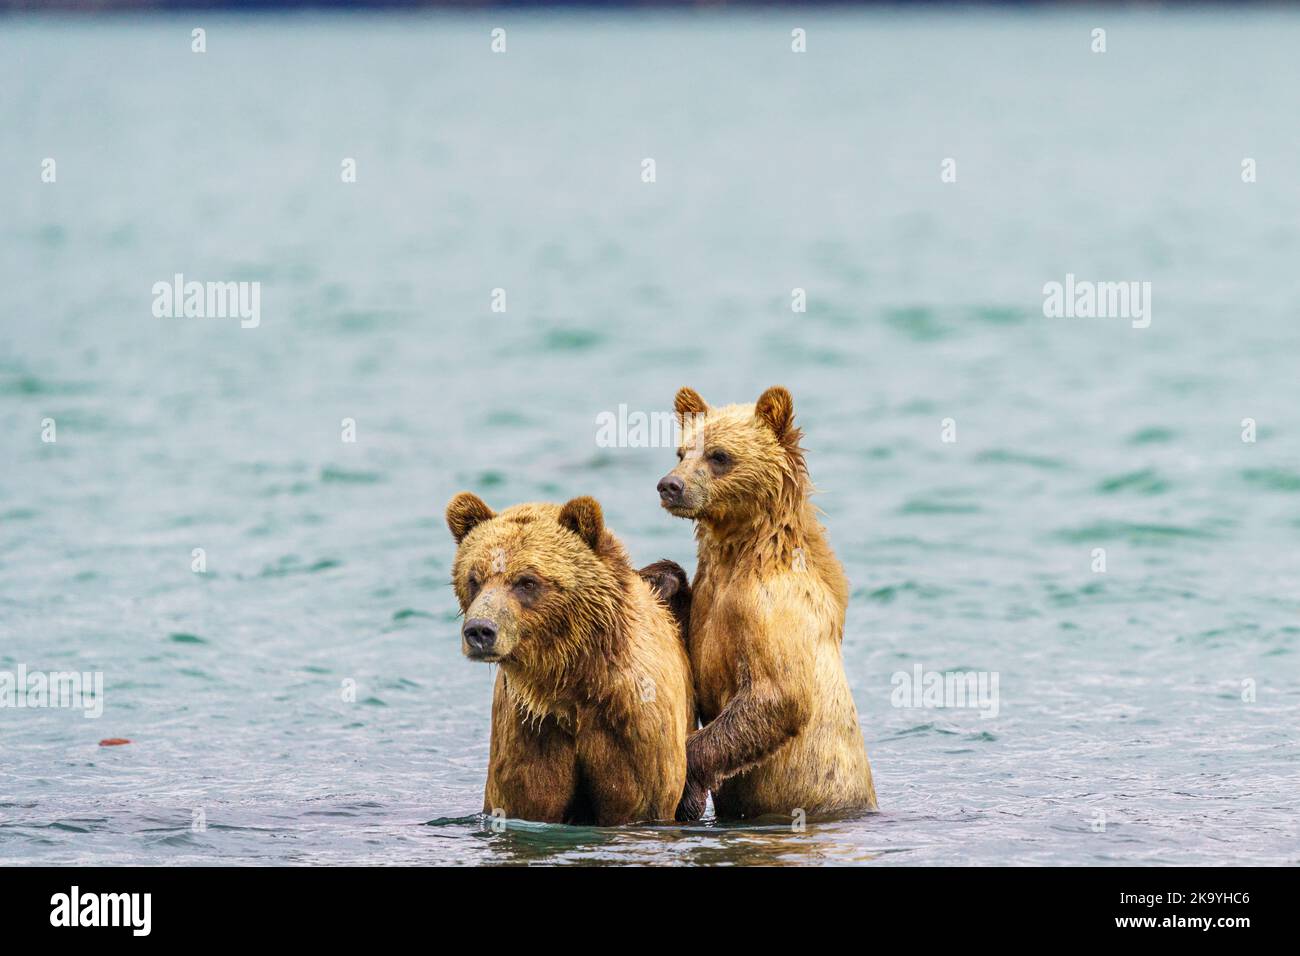 Grizzly bear mom with 1 year old cub in Knight Inlet, British Columbia, Canada Stock Photo